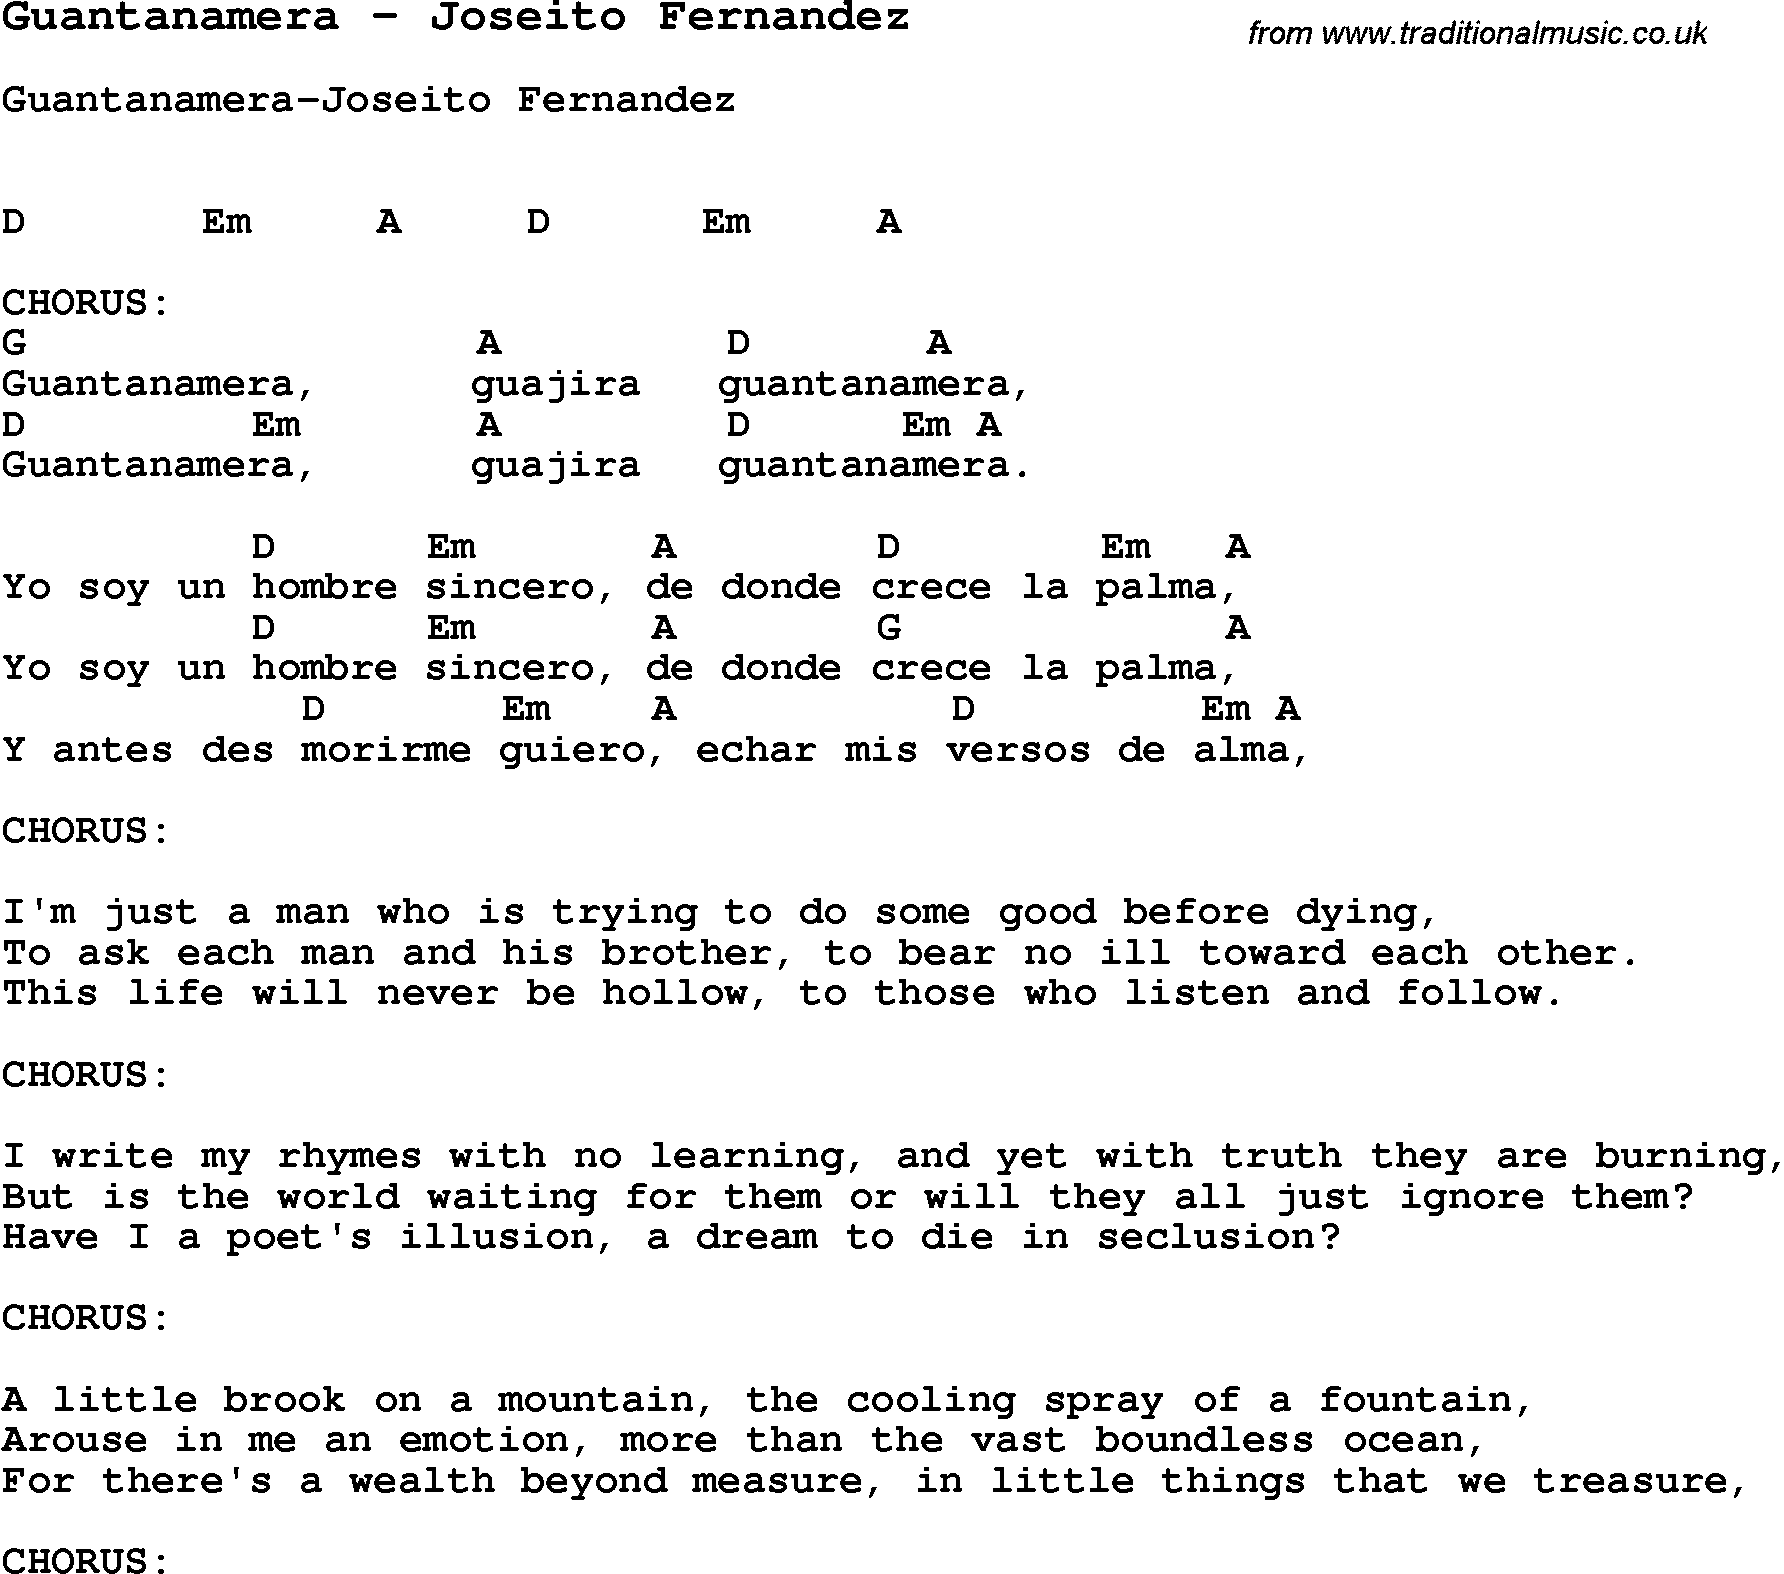 Song Guantanamera by Joseito Fernandez, with lyrics for vocal performance and accompaniment chords for Ukulele, Guitar Banjo etc.